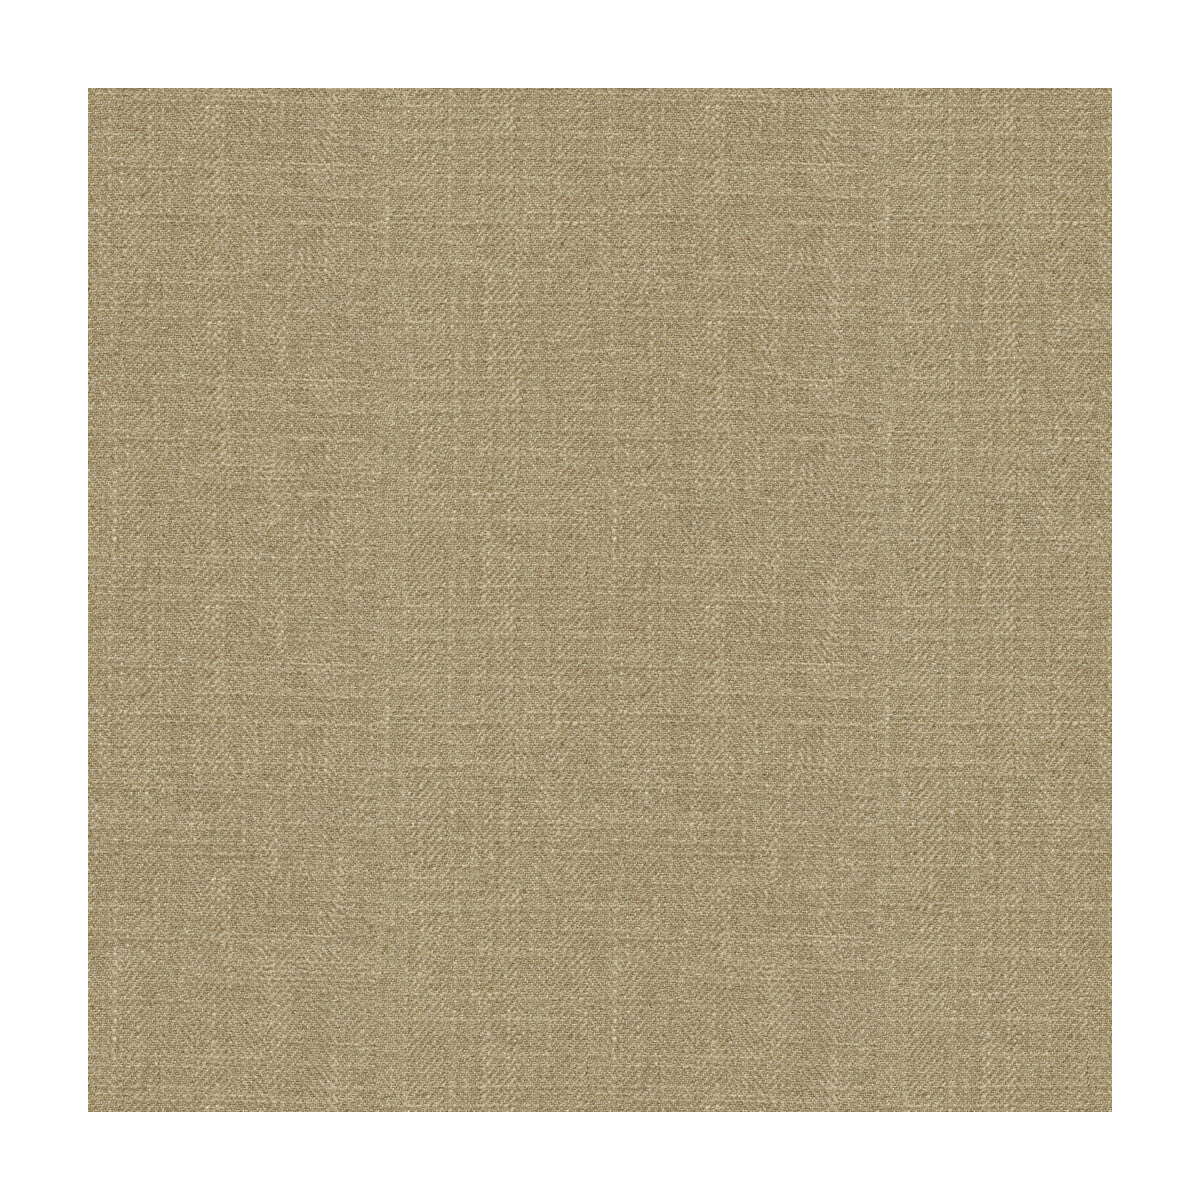 Kravet Basics fabric in 33842-106 color - pattern 33842.106.0 - by Kravet Basics in the Perfect Plains collection